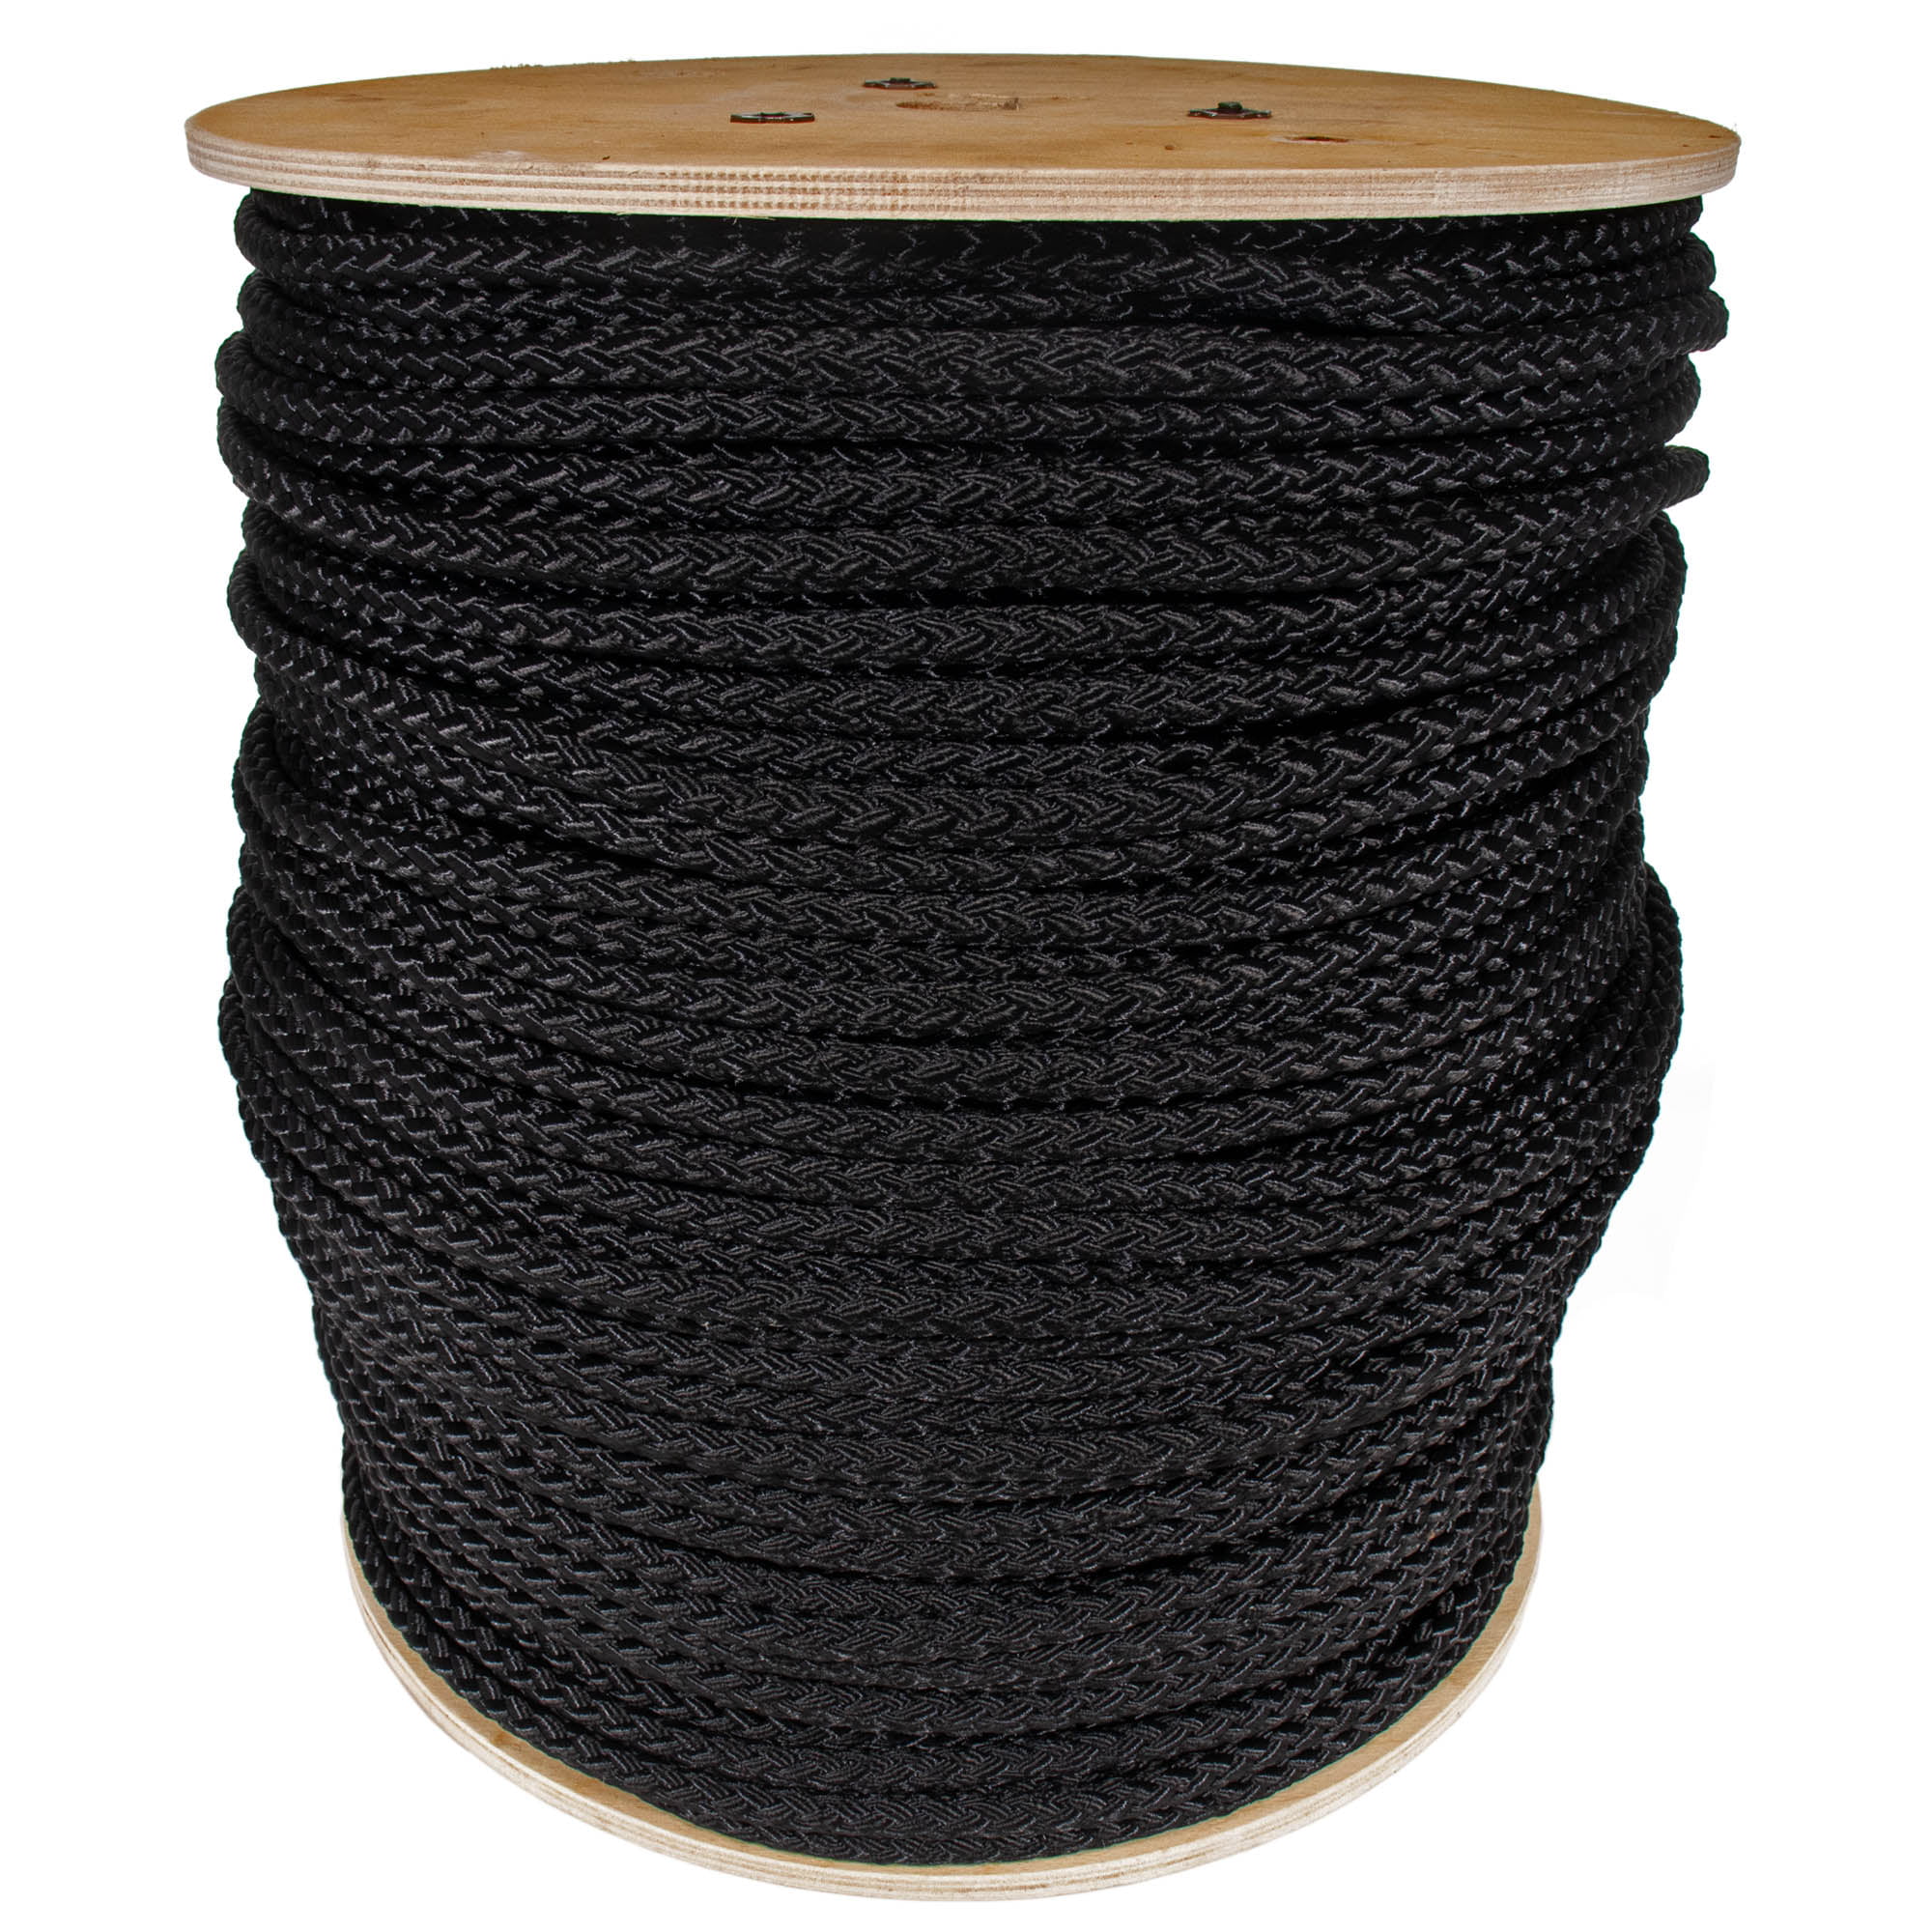 Solid Braid Nylon Rope in 1/8, 5/32, 3/16, 1/4, 5/16, 3/8, and 1/2 Inch -  Marine